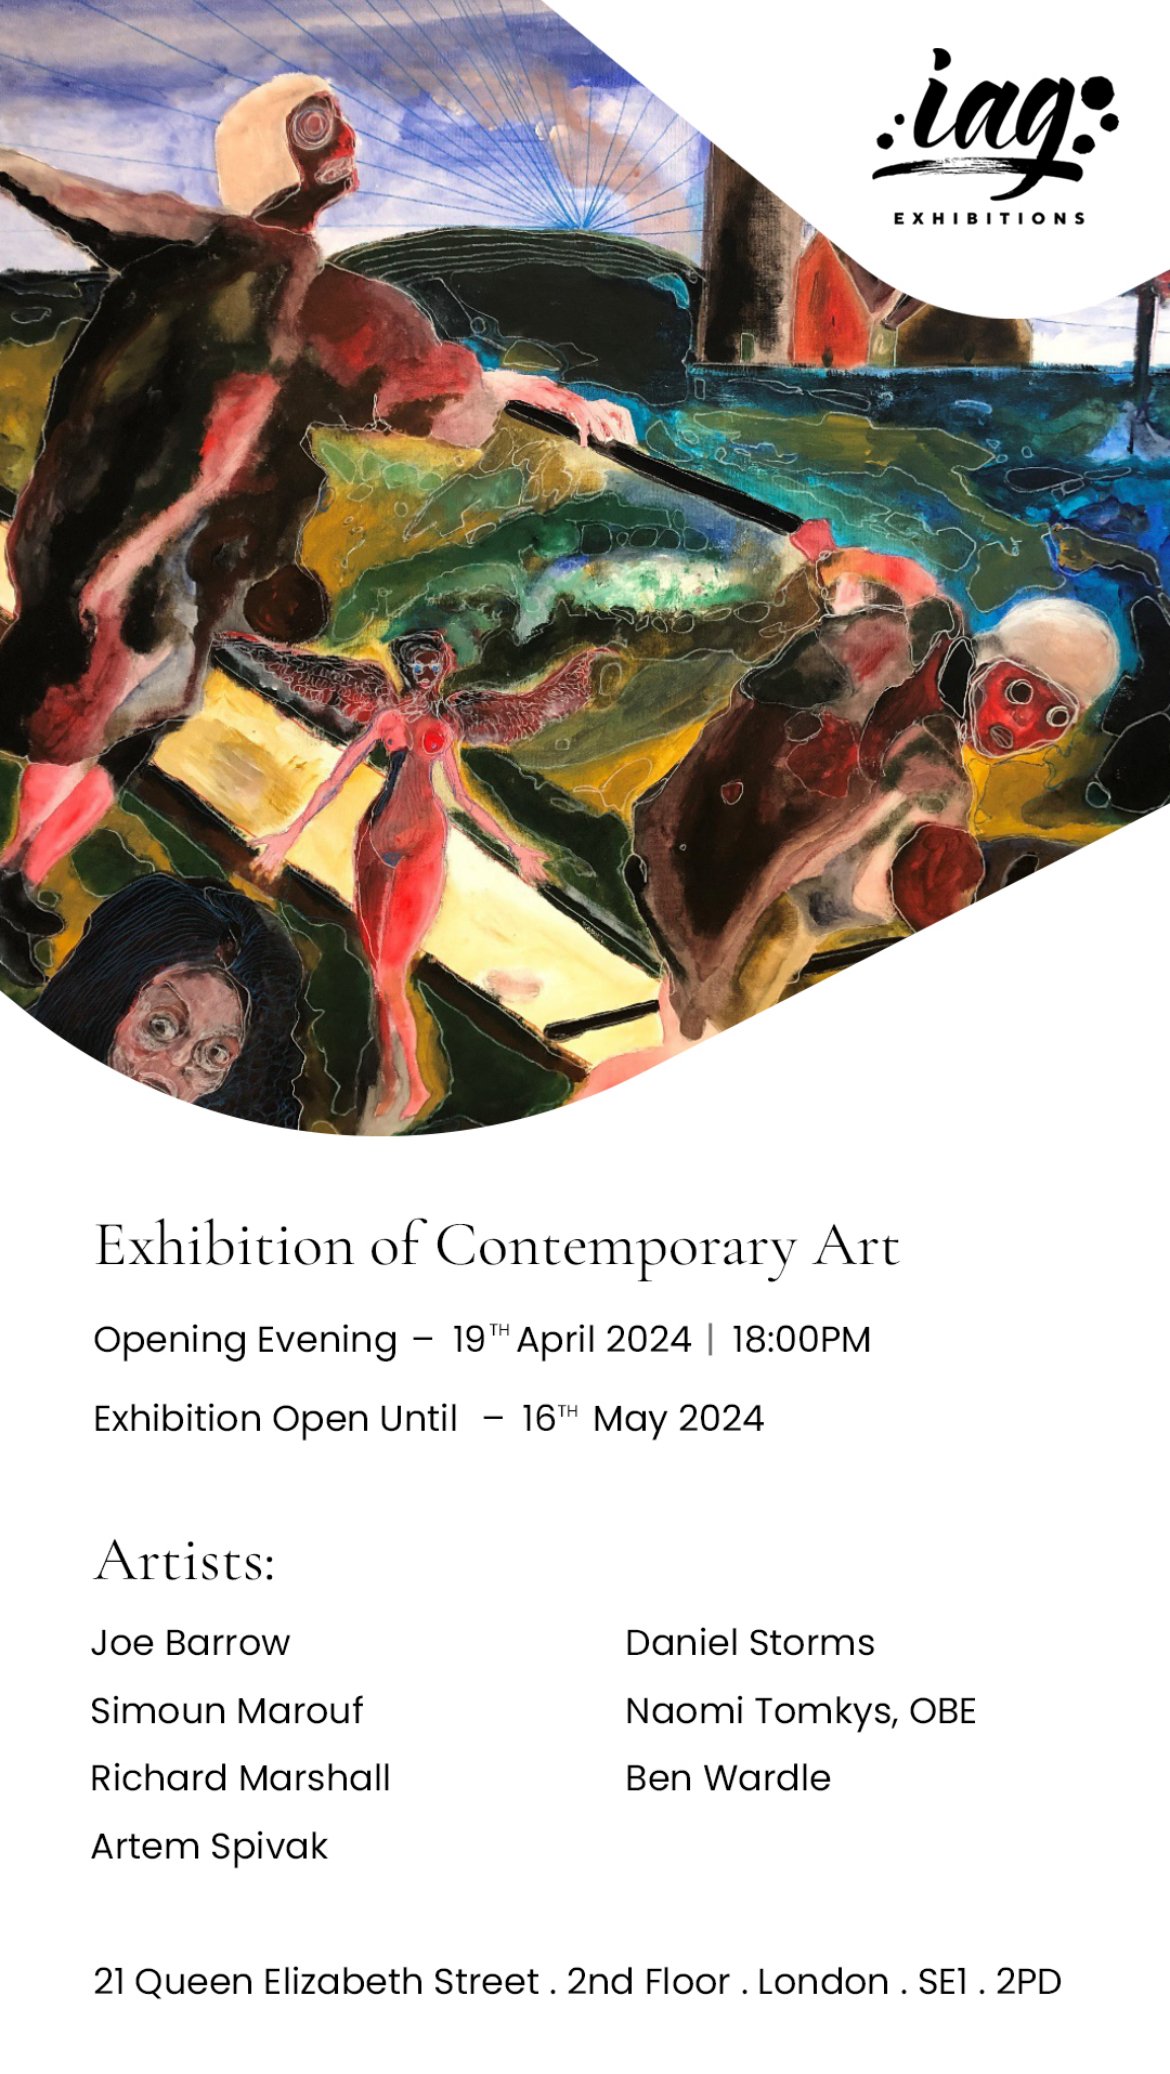 New Exhibition starts 19th April in Tower Bridge.